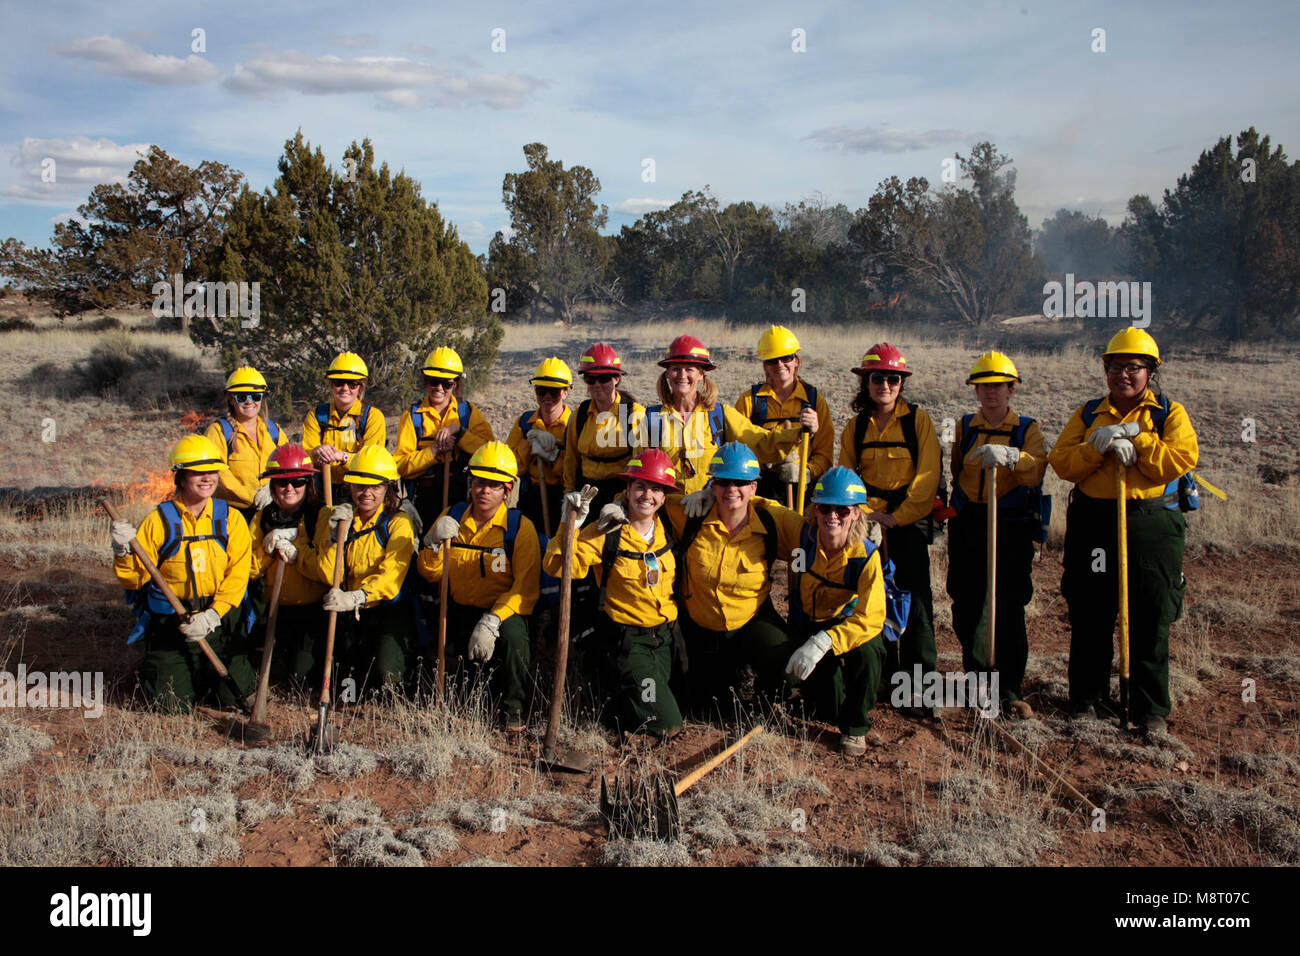 WIWF-COF . Women in Wildland Fire Bootcamp at Blue Ridge Ranger District-Coconino National Forest. Stock Photo